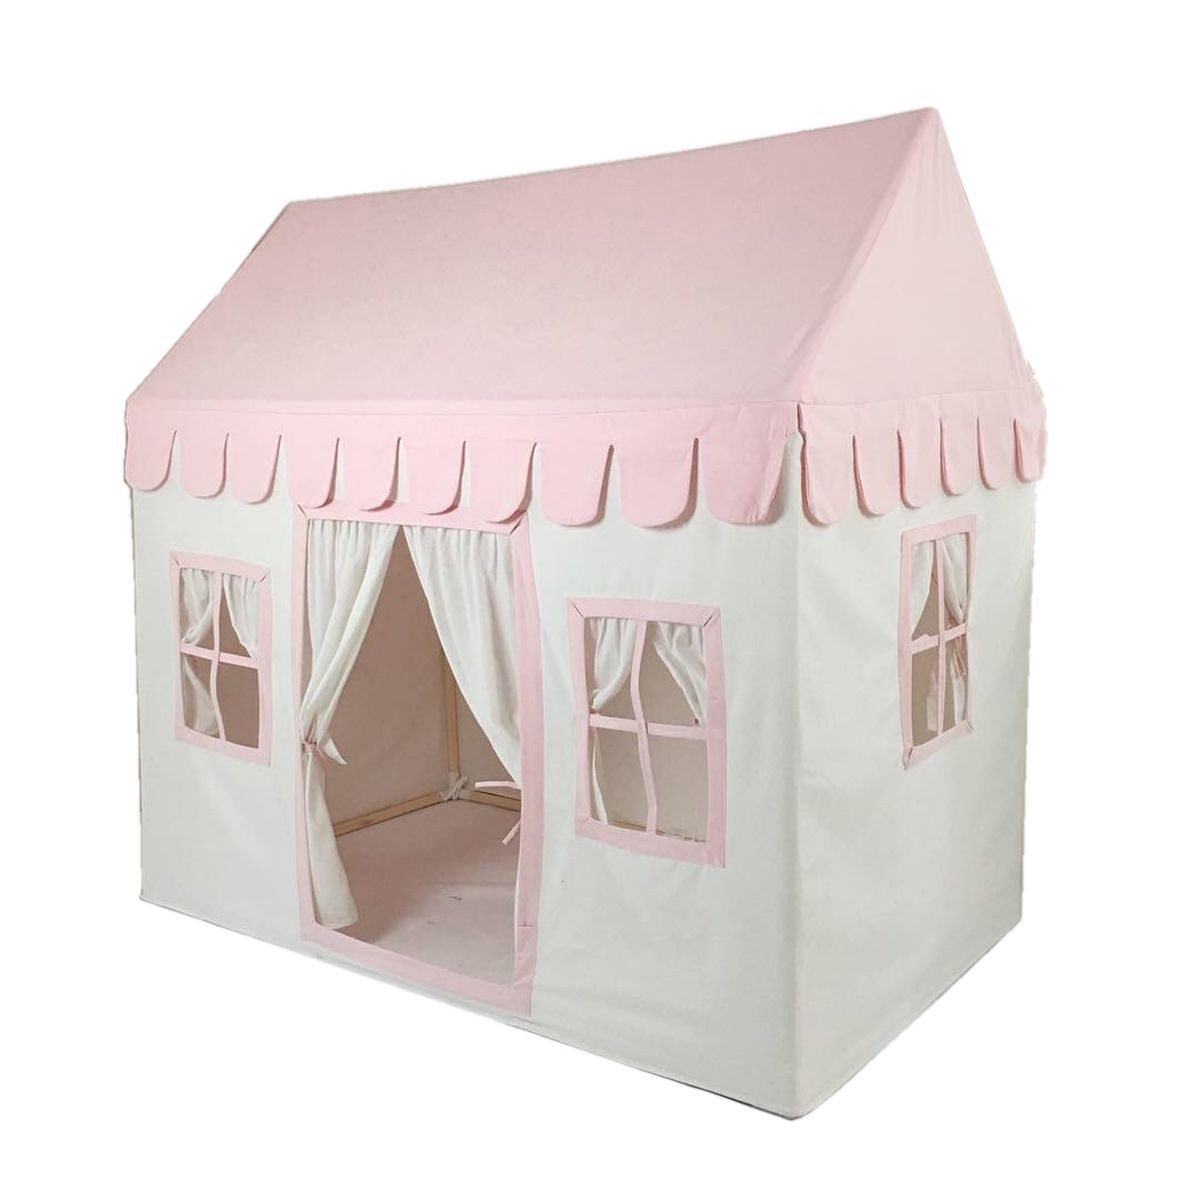 Domestic Objects Playhouse | The Tot